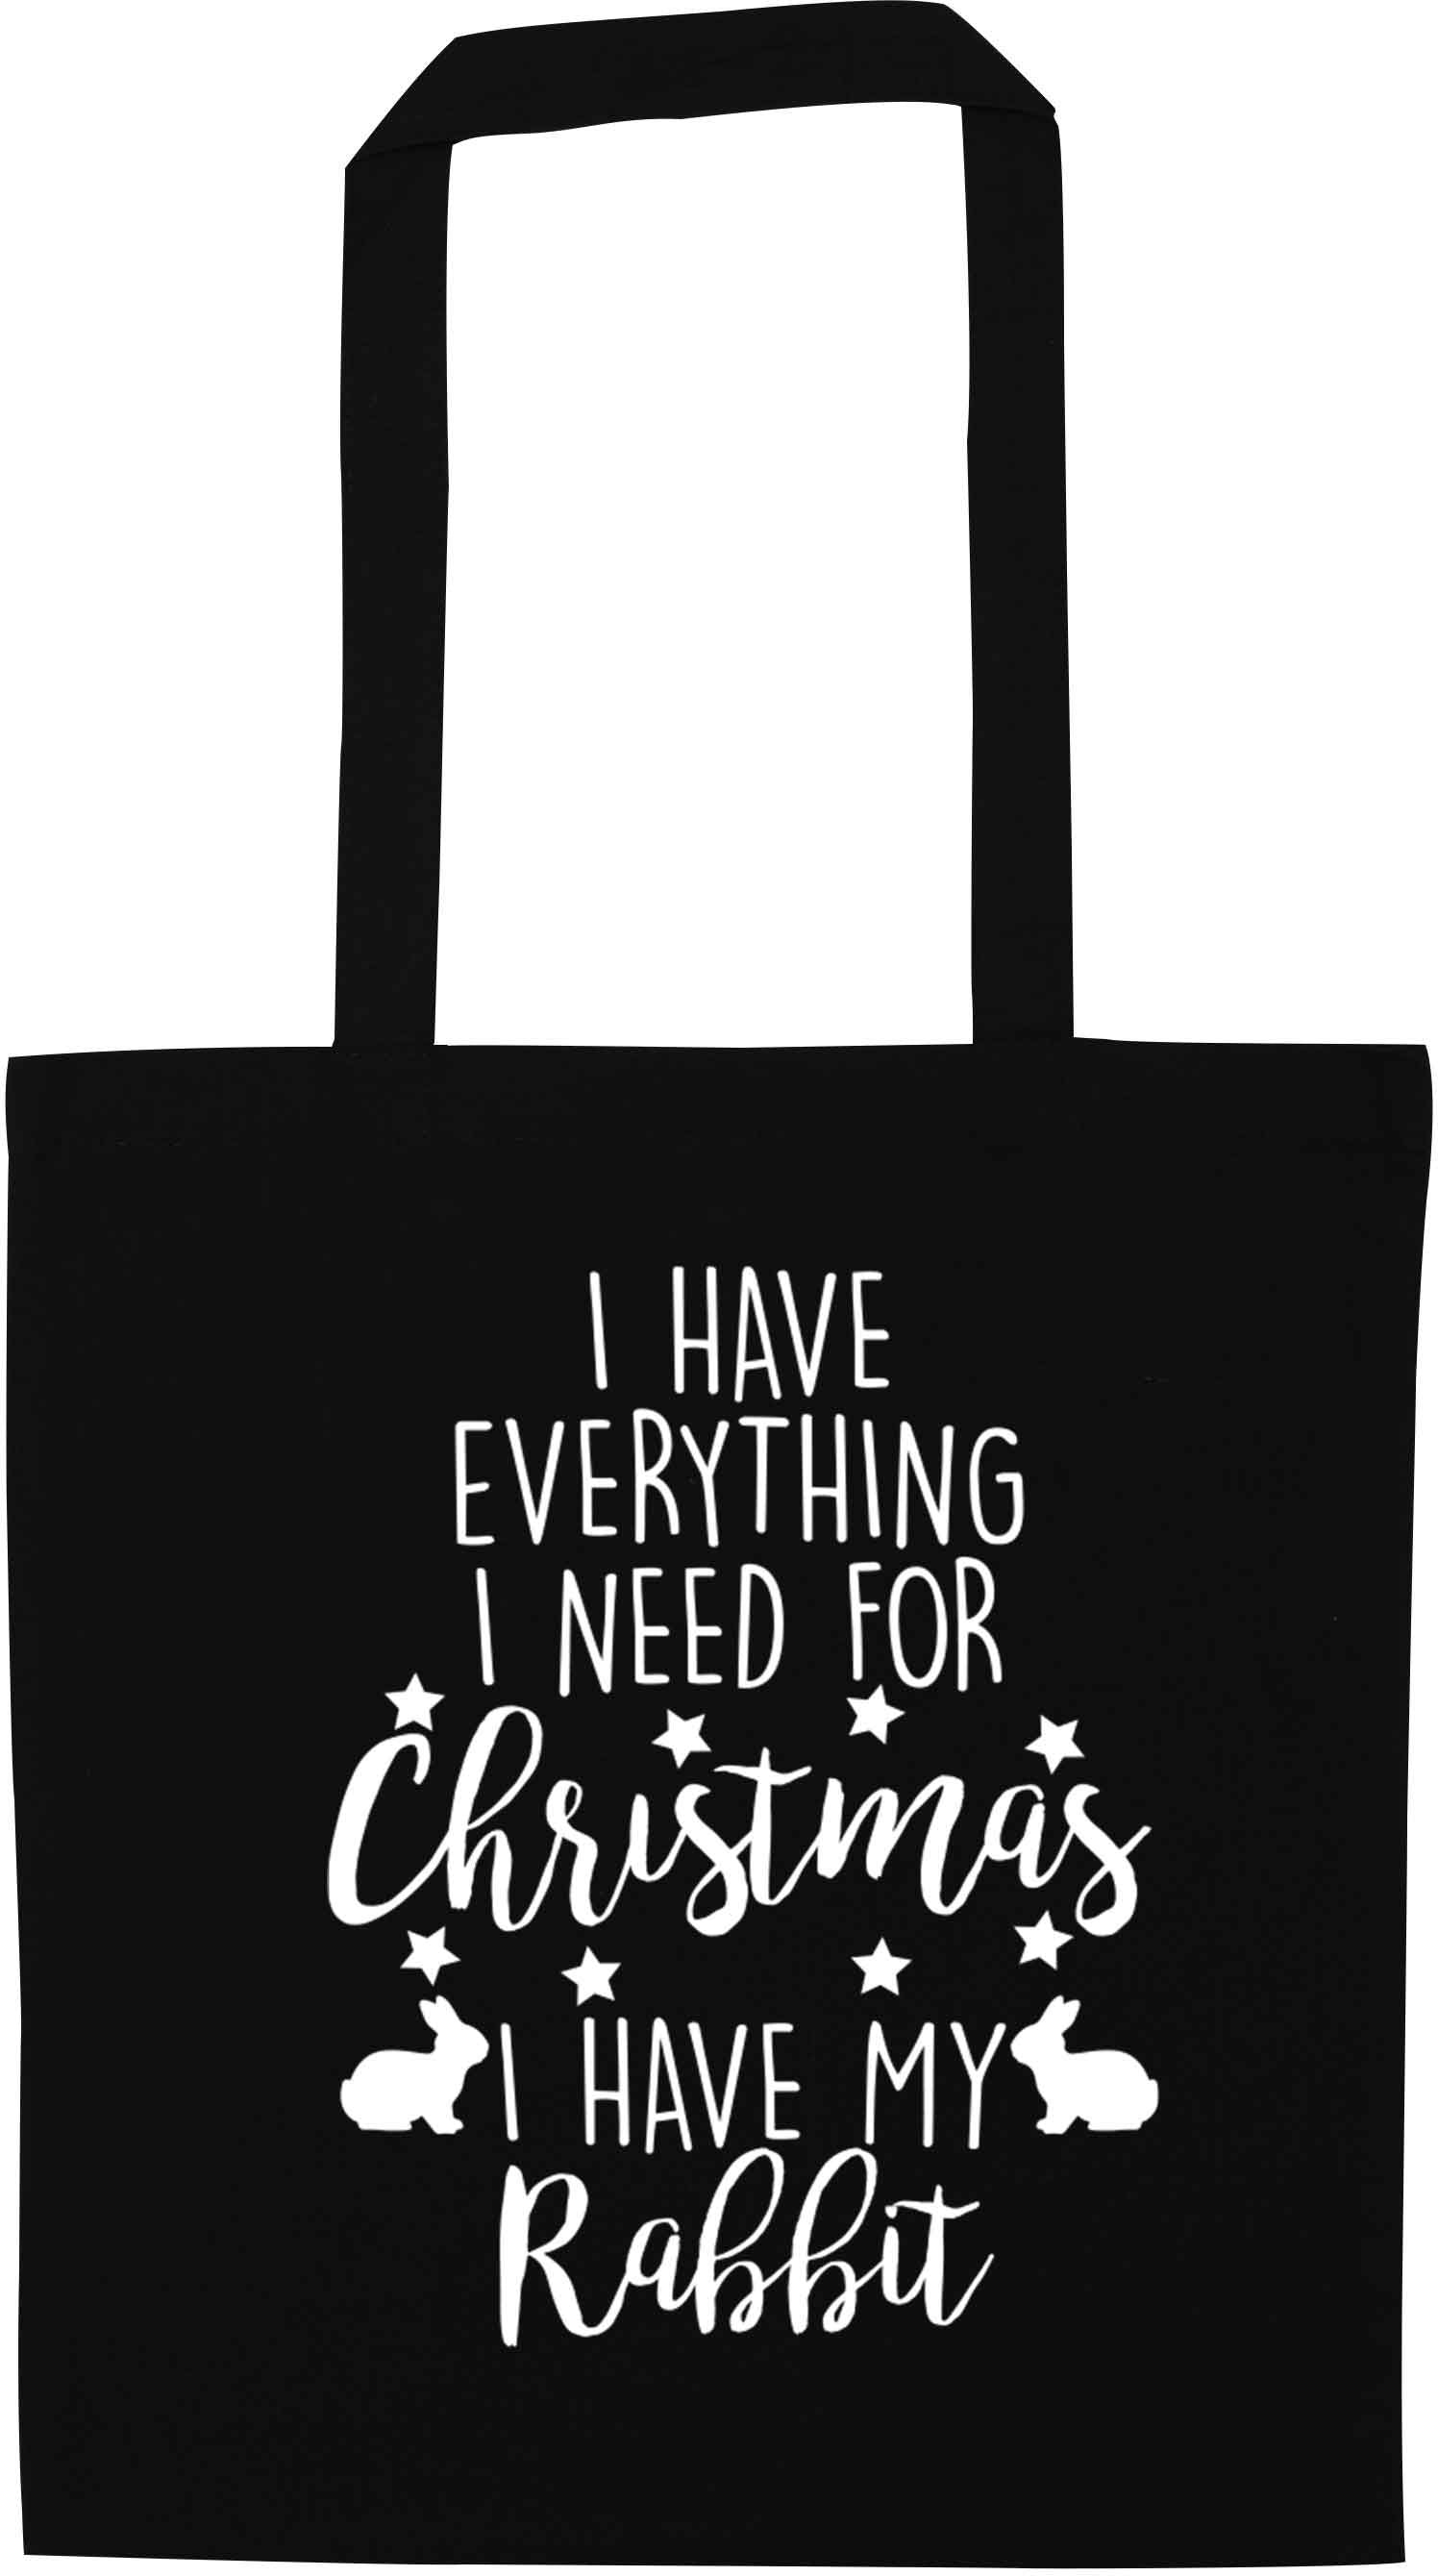 I have everything I need for Christmas I have my rabbit black tote bag